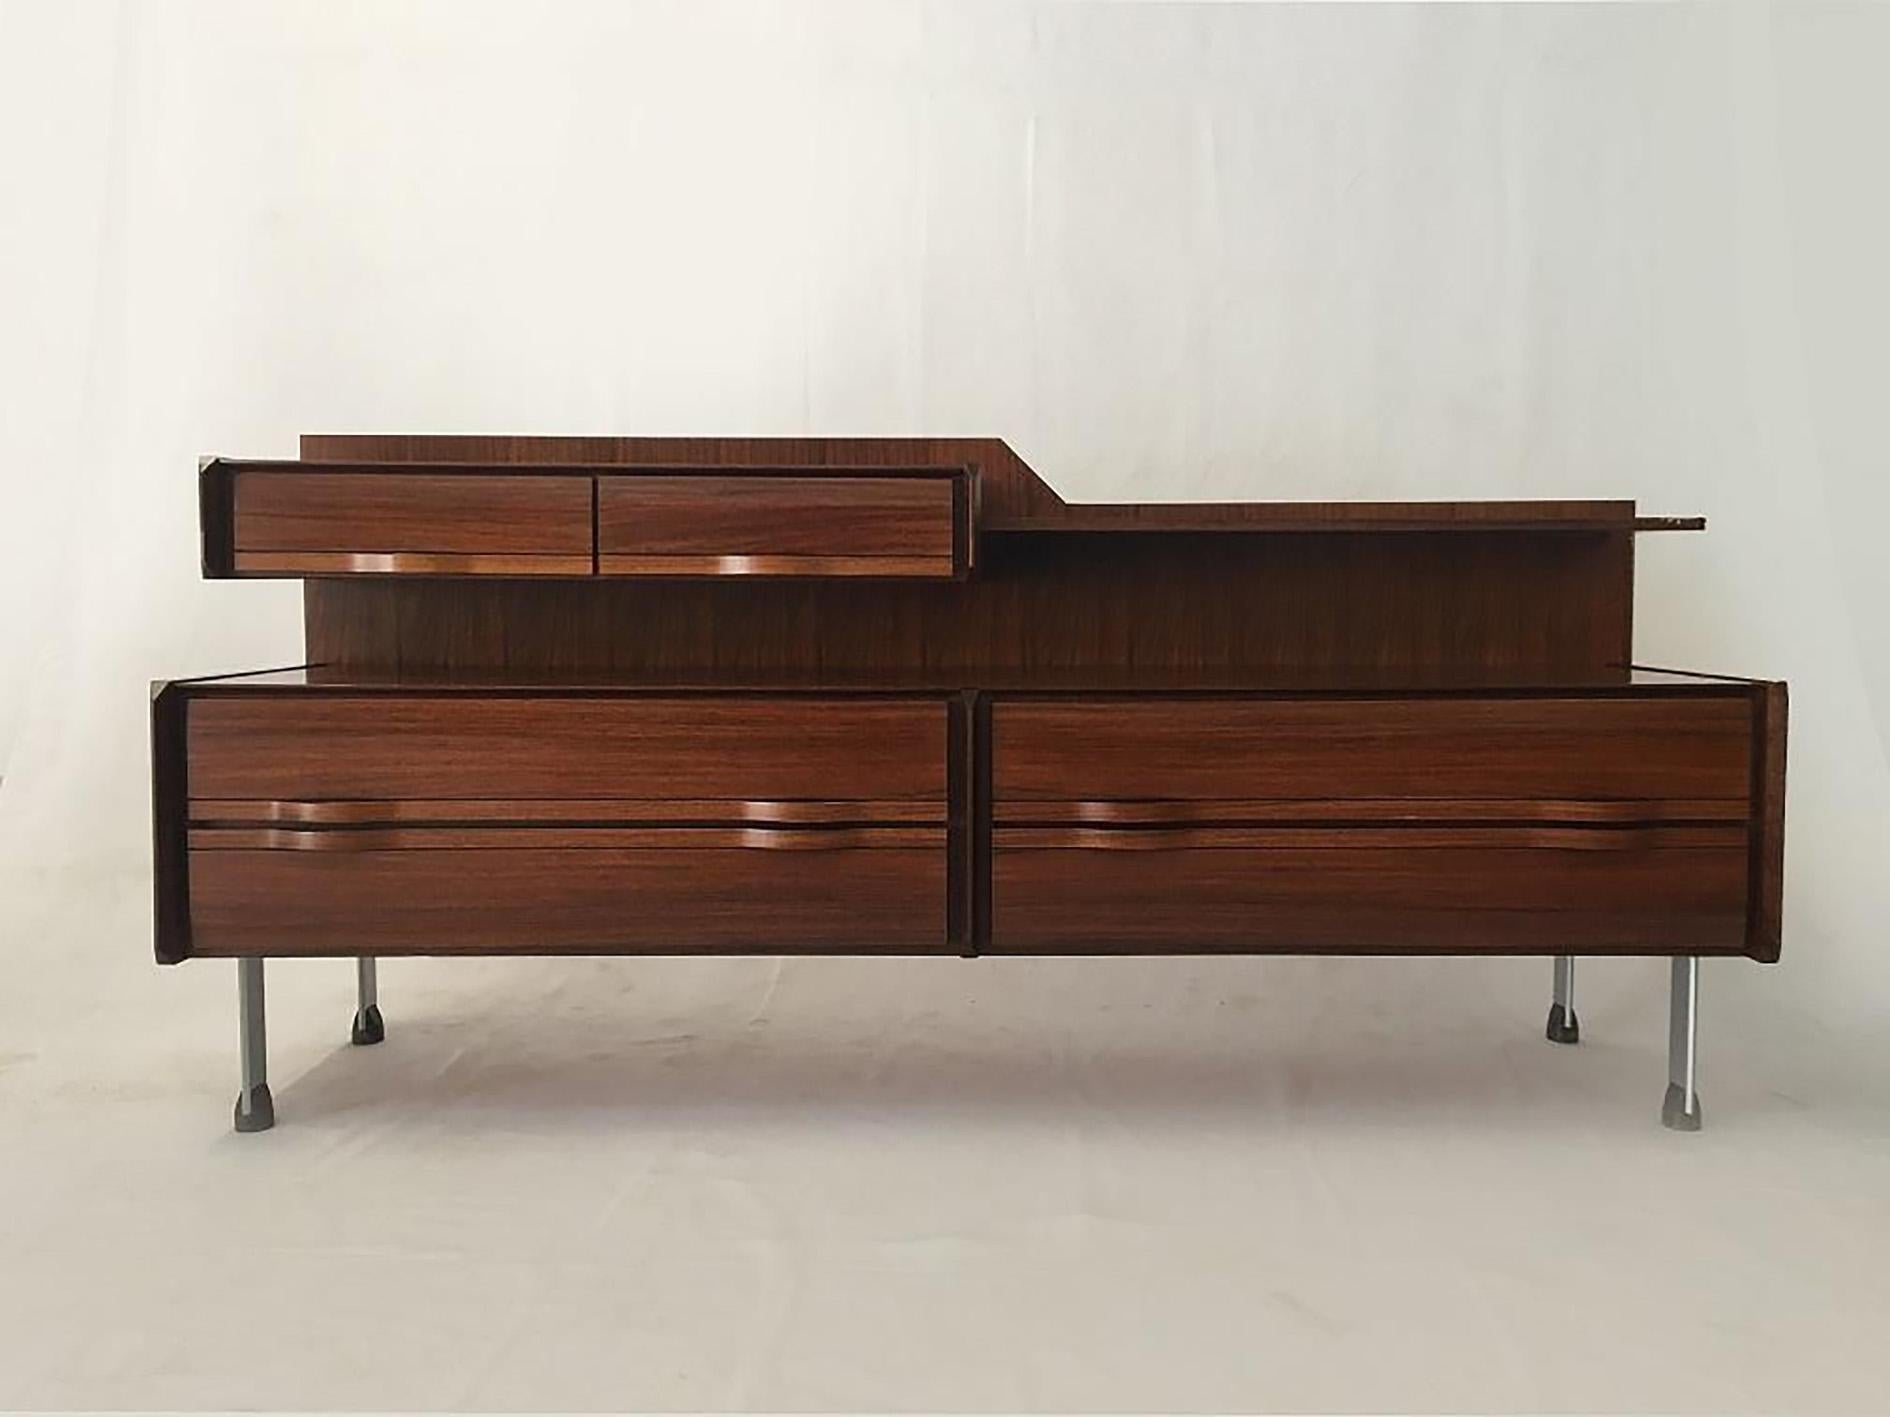 Gianfranco Frattini - La Permente Mobili Cantú, chest of drawers
Italy, 1960-1969, wood, rosewood

Chest of drawers designed by Gianfranco Frattini in the 1960s for Cantù La Permanente,
 made of rosewood with metal legs, preserved in excellent